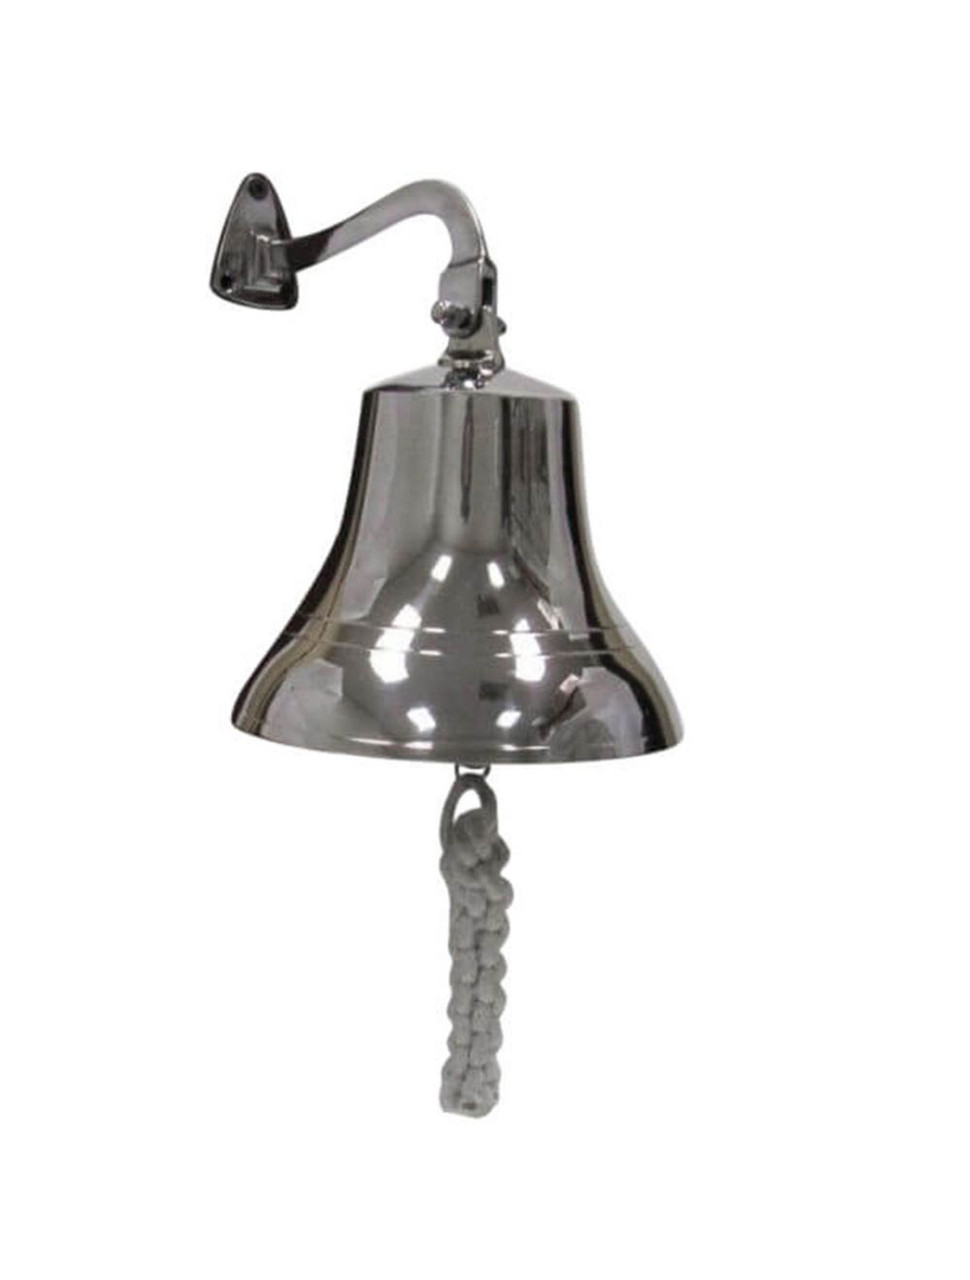 Solid Brass Chrome Finish Ships Bell  Nautical Decor